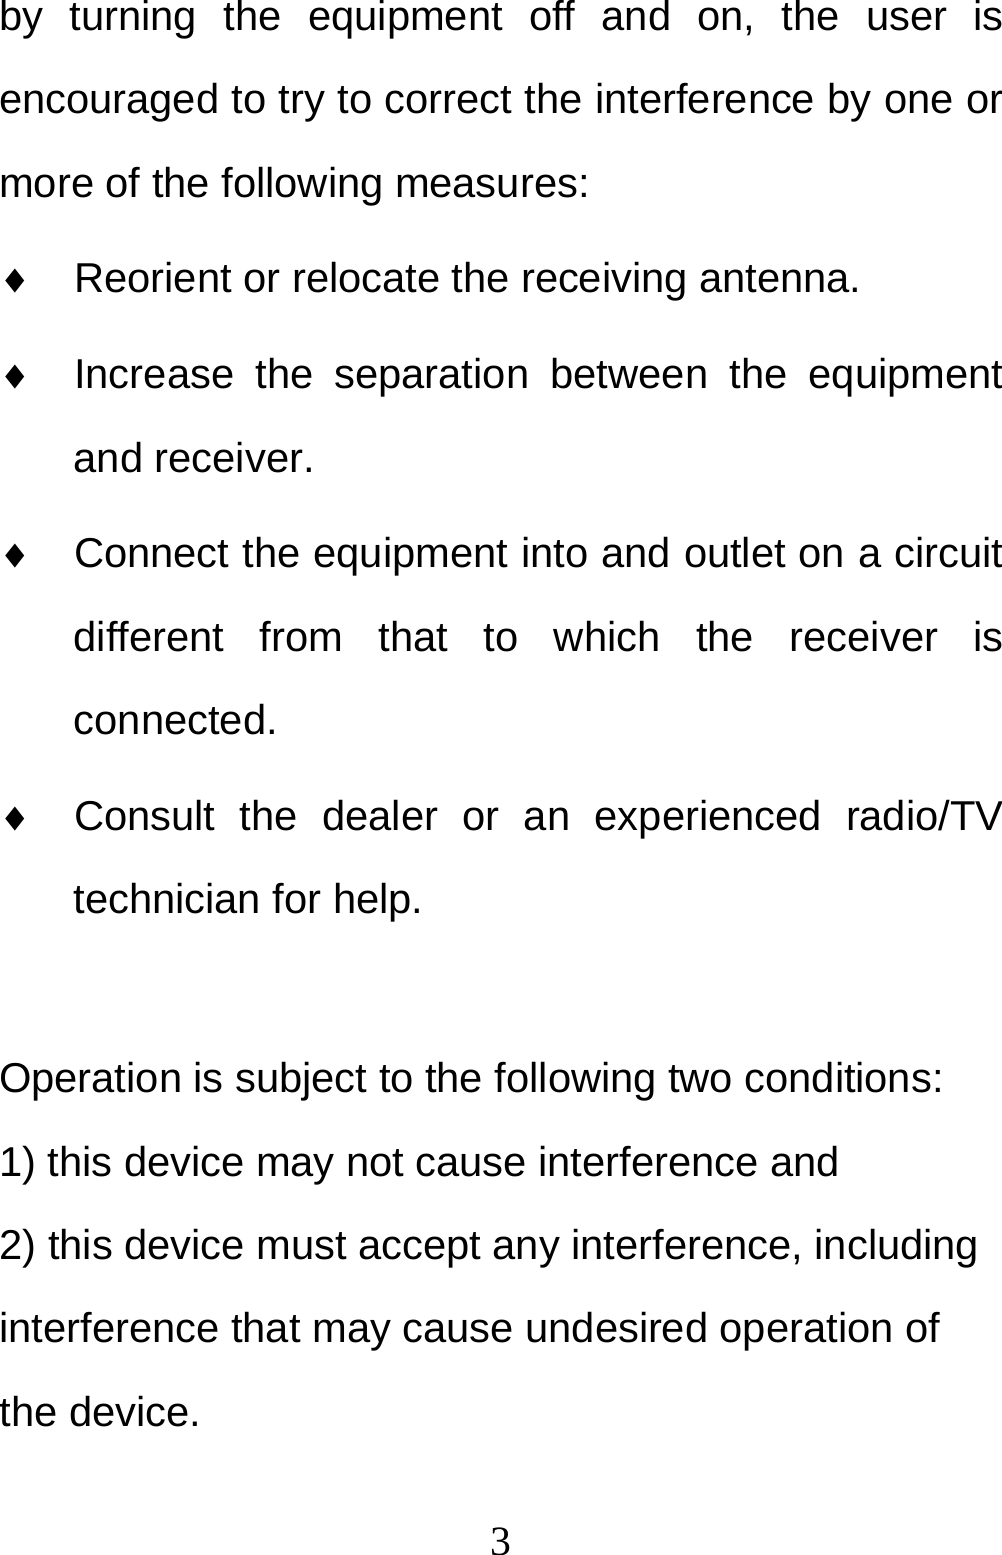  3by turning the equipment off and on, the user is encouraged to try to correct the interference by one or more of the following measures:   Reorient or relocate the receiving antenna.   Increase the separation between the equipment and receiver.   Connect the equipment into and outlet on a circuit different from that to which the receiver is connected.   Consult the dealer or an experienced radio/TV technician for help.  Operation is subject to the following two conditions: 1) this device may not cause interference and 2) this device must accept any interference, including interference that may cause undesired operation of the device. 